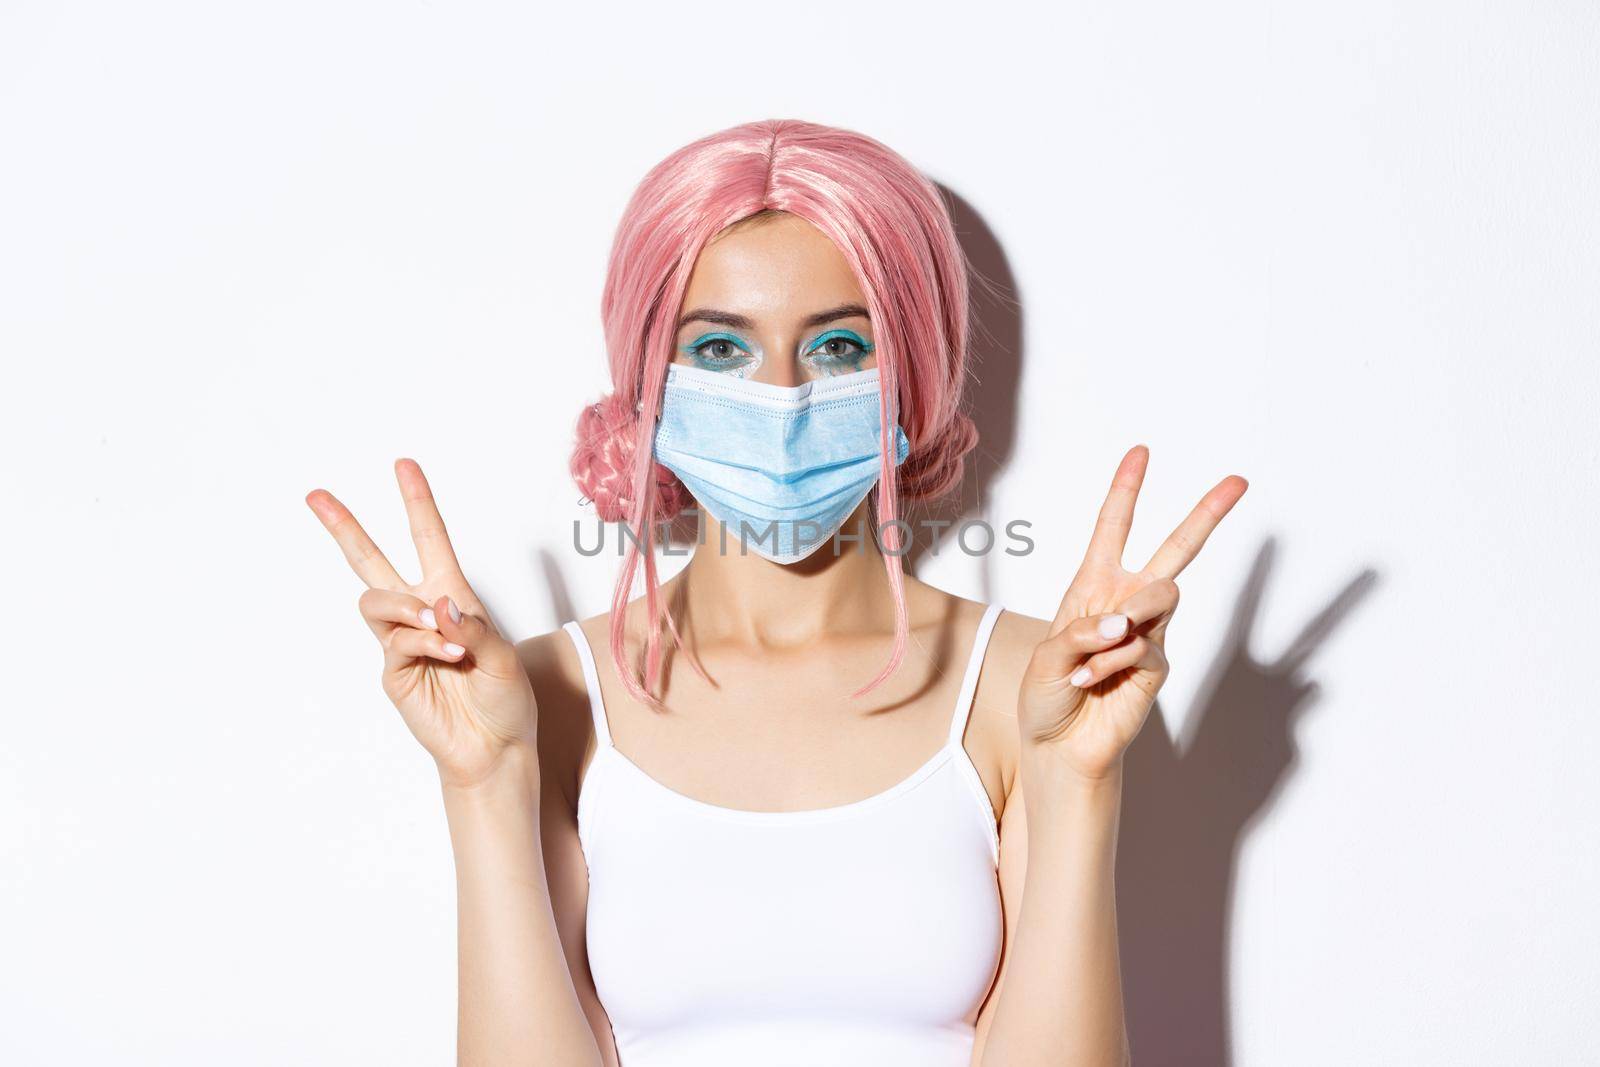 Coronavirus, social distancing and lifestyle concept. Close-up of pretty party girl in medical mask and pink wig, showing peace signs and smiling, standing over white background.